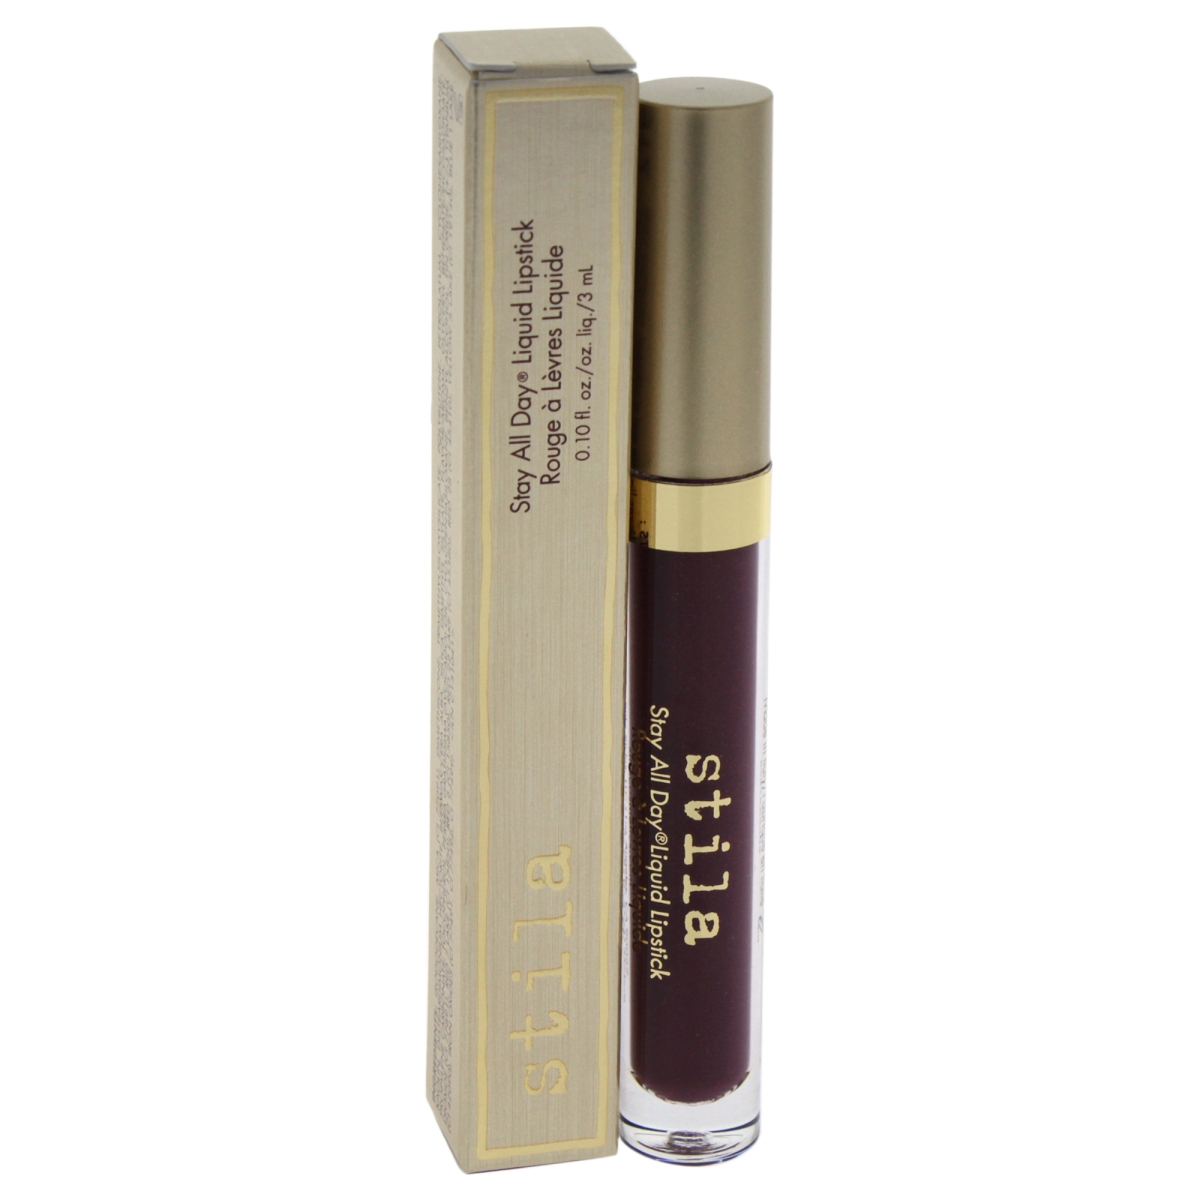 W-c-14408 0.1 Oz Stay All Day Liquid Lipstick For Womens - Amore